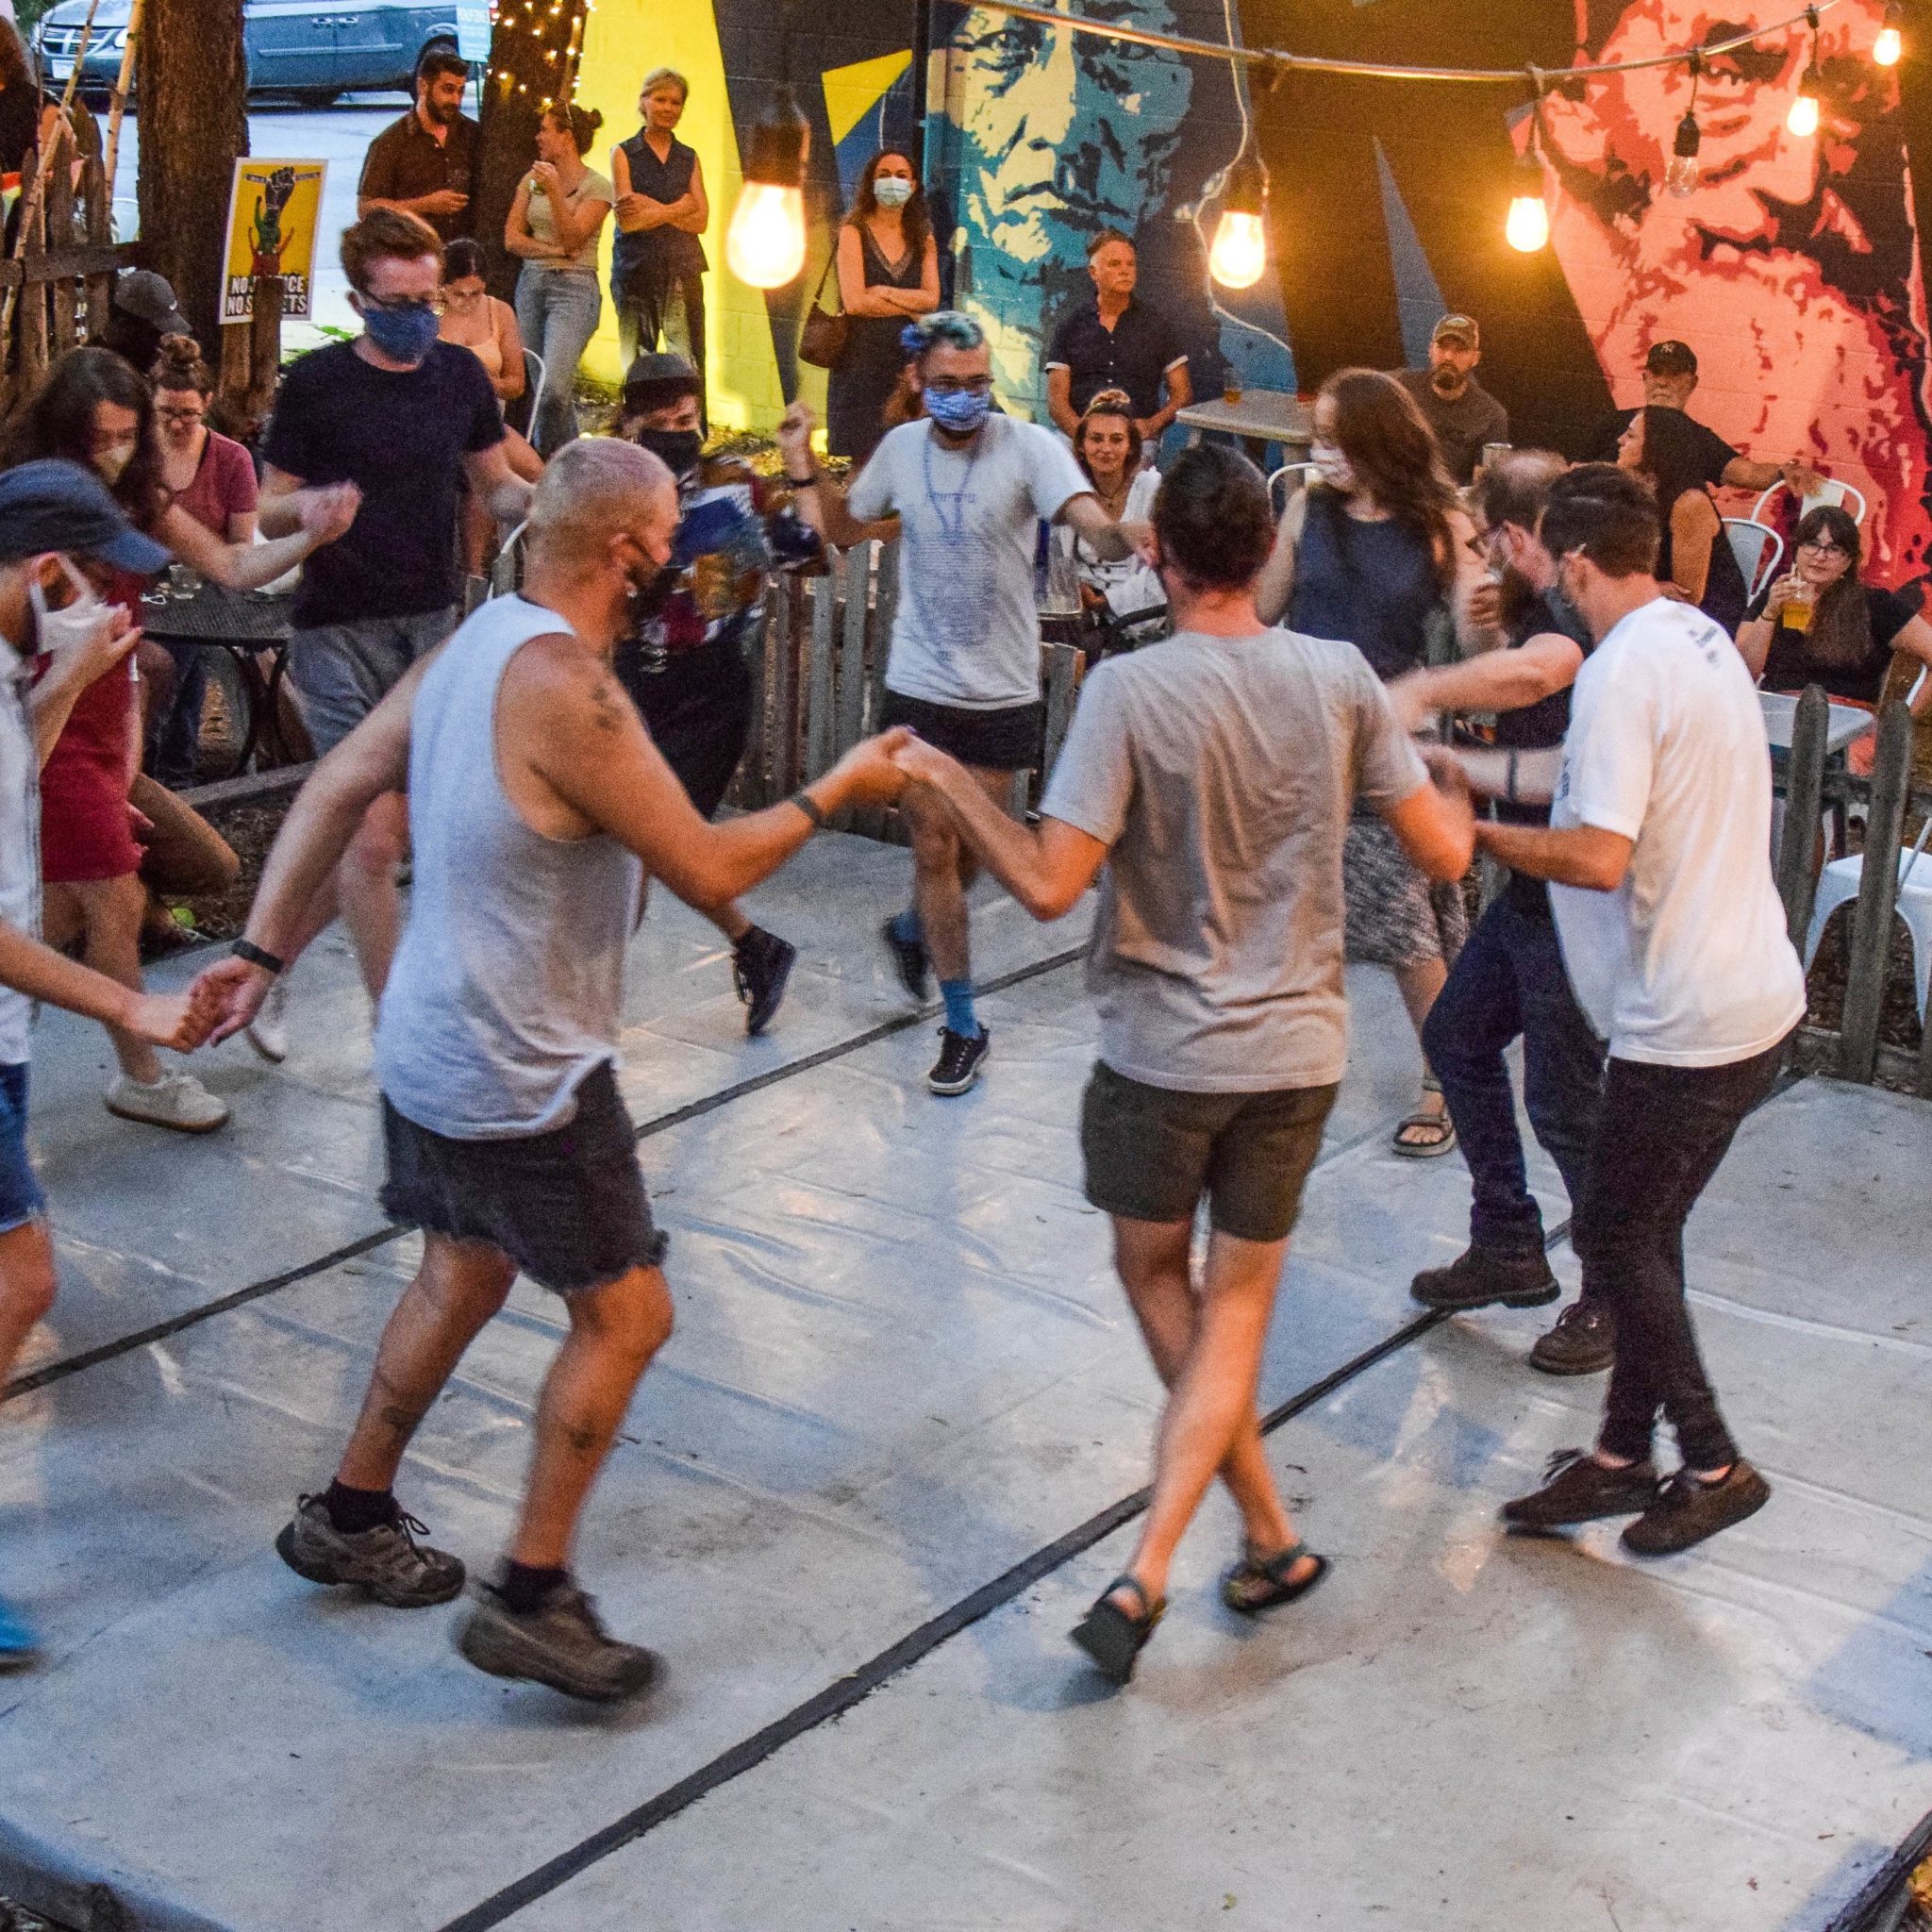 A group of people in summer clothes dance in a circle while holding hands. A crowd watches.